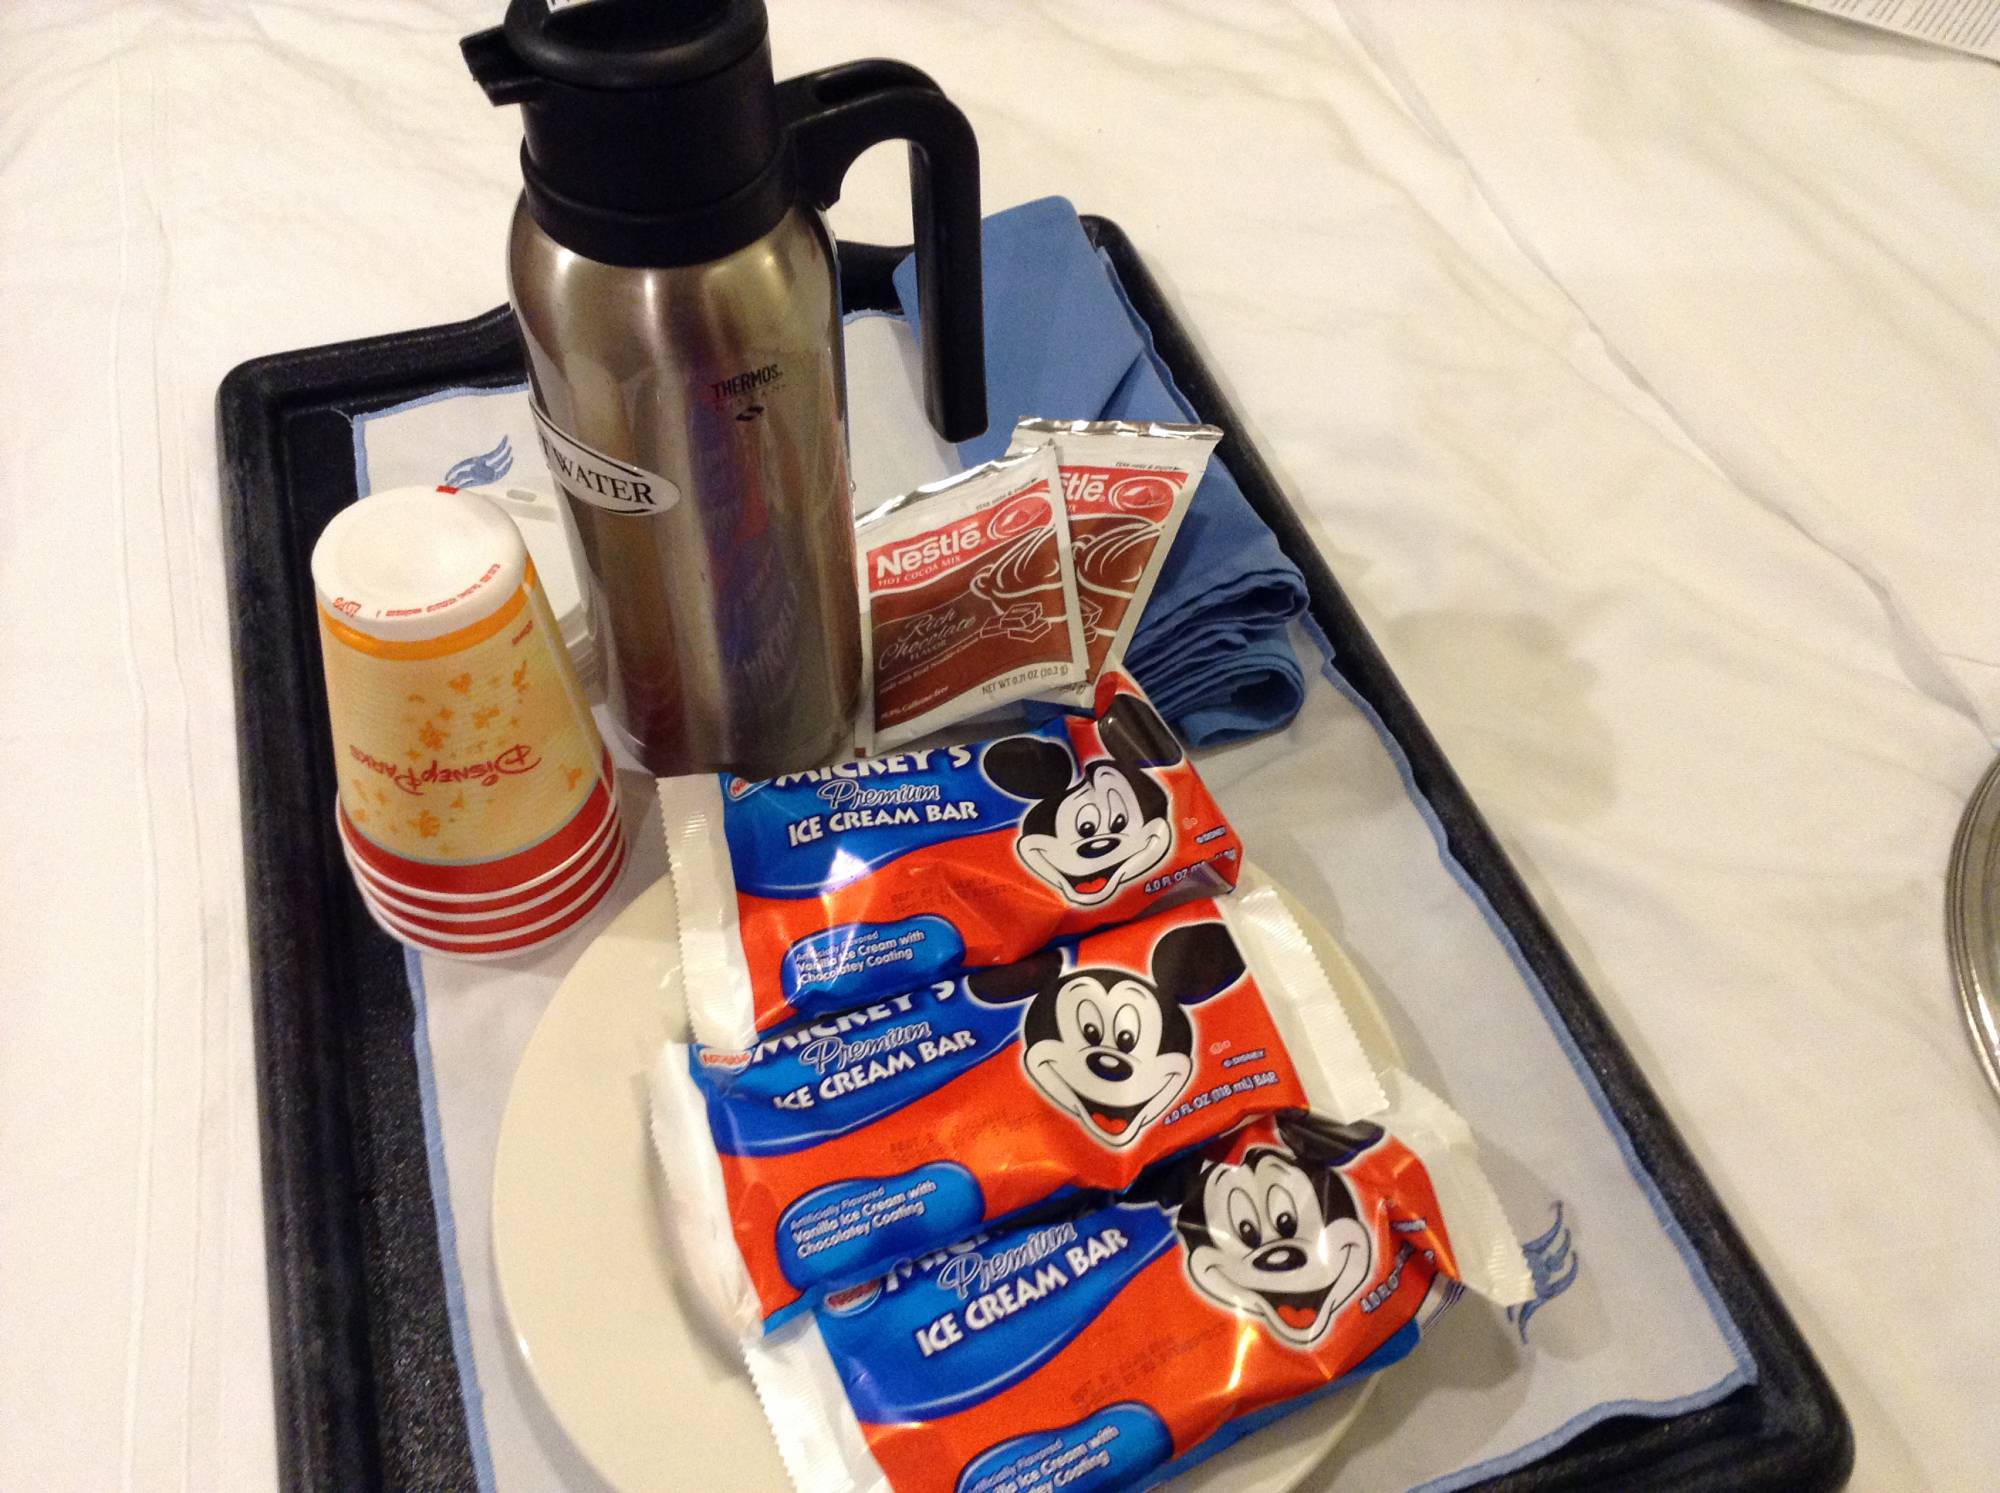 Learn how to find healthy food onboard the Disney Cruise Line |PassPorter.com